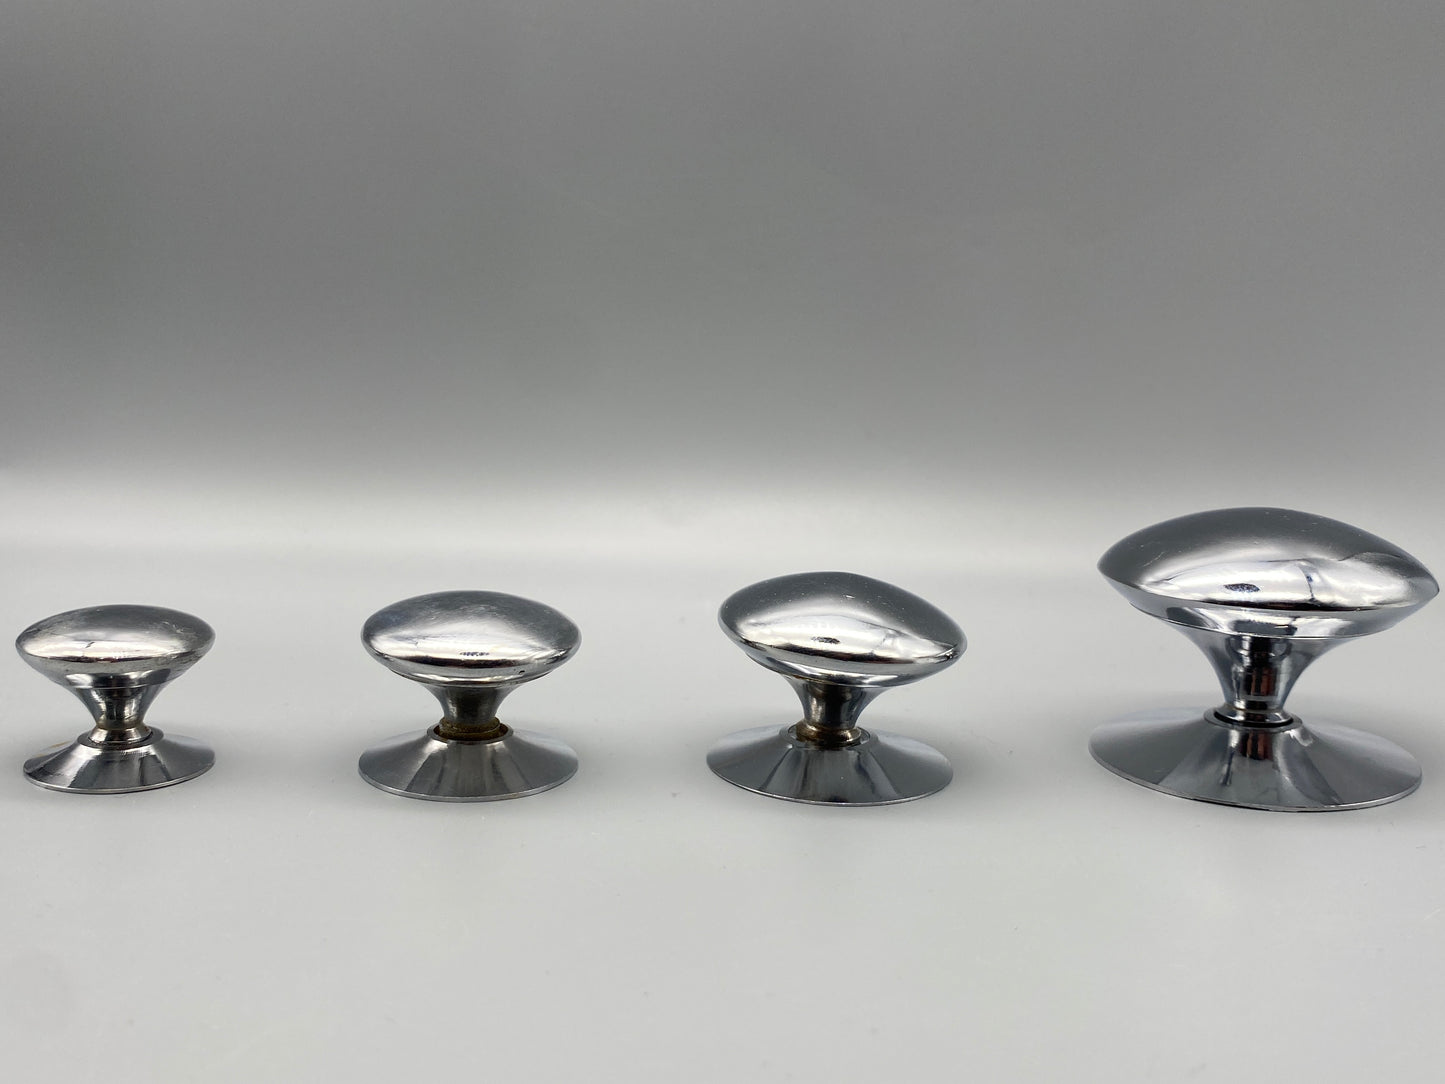 Solid Chrome on Brass Victorian Polished Knobs - Sizes from 25mm - 50mm Diameter